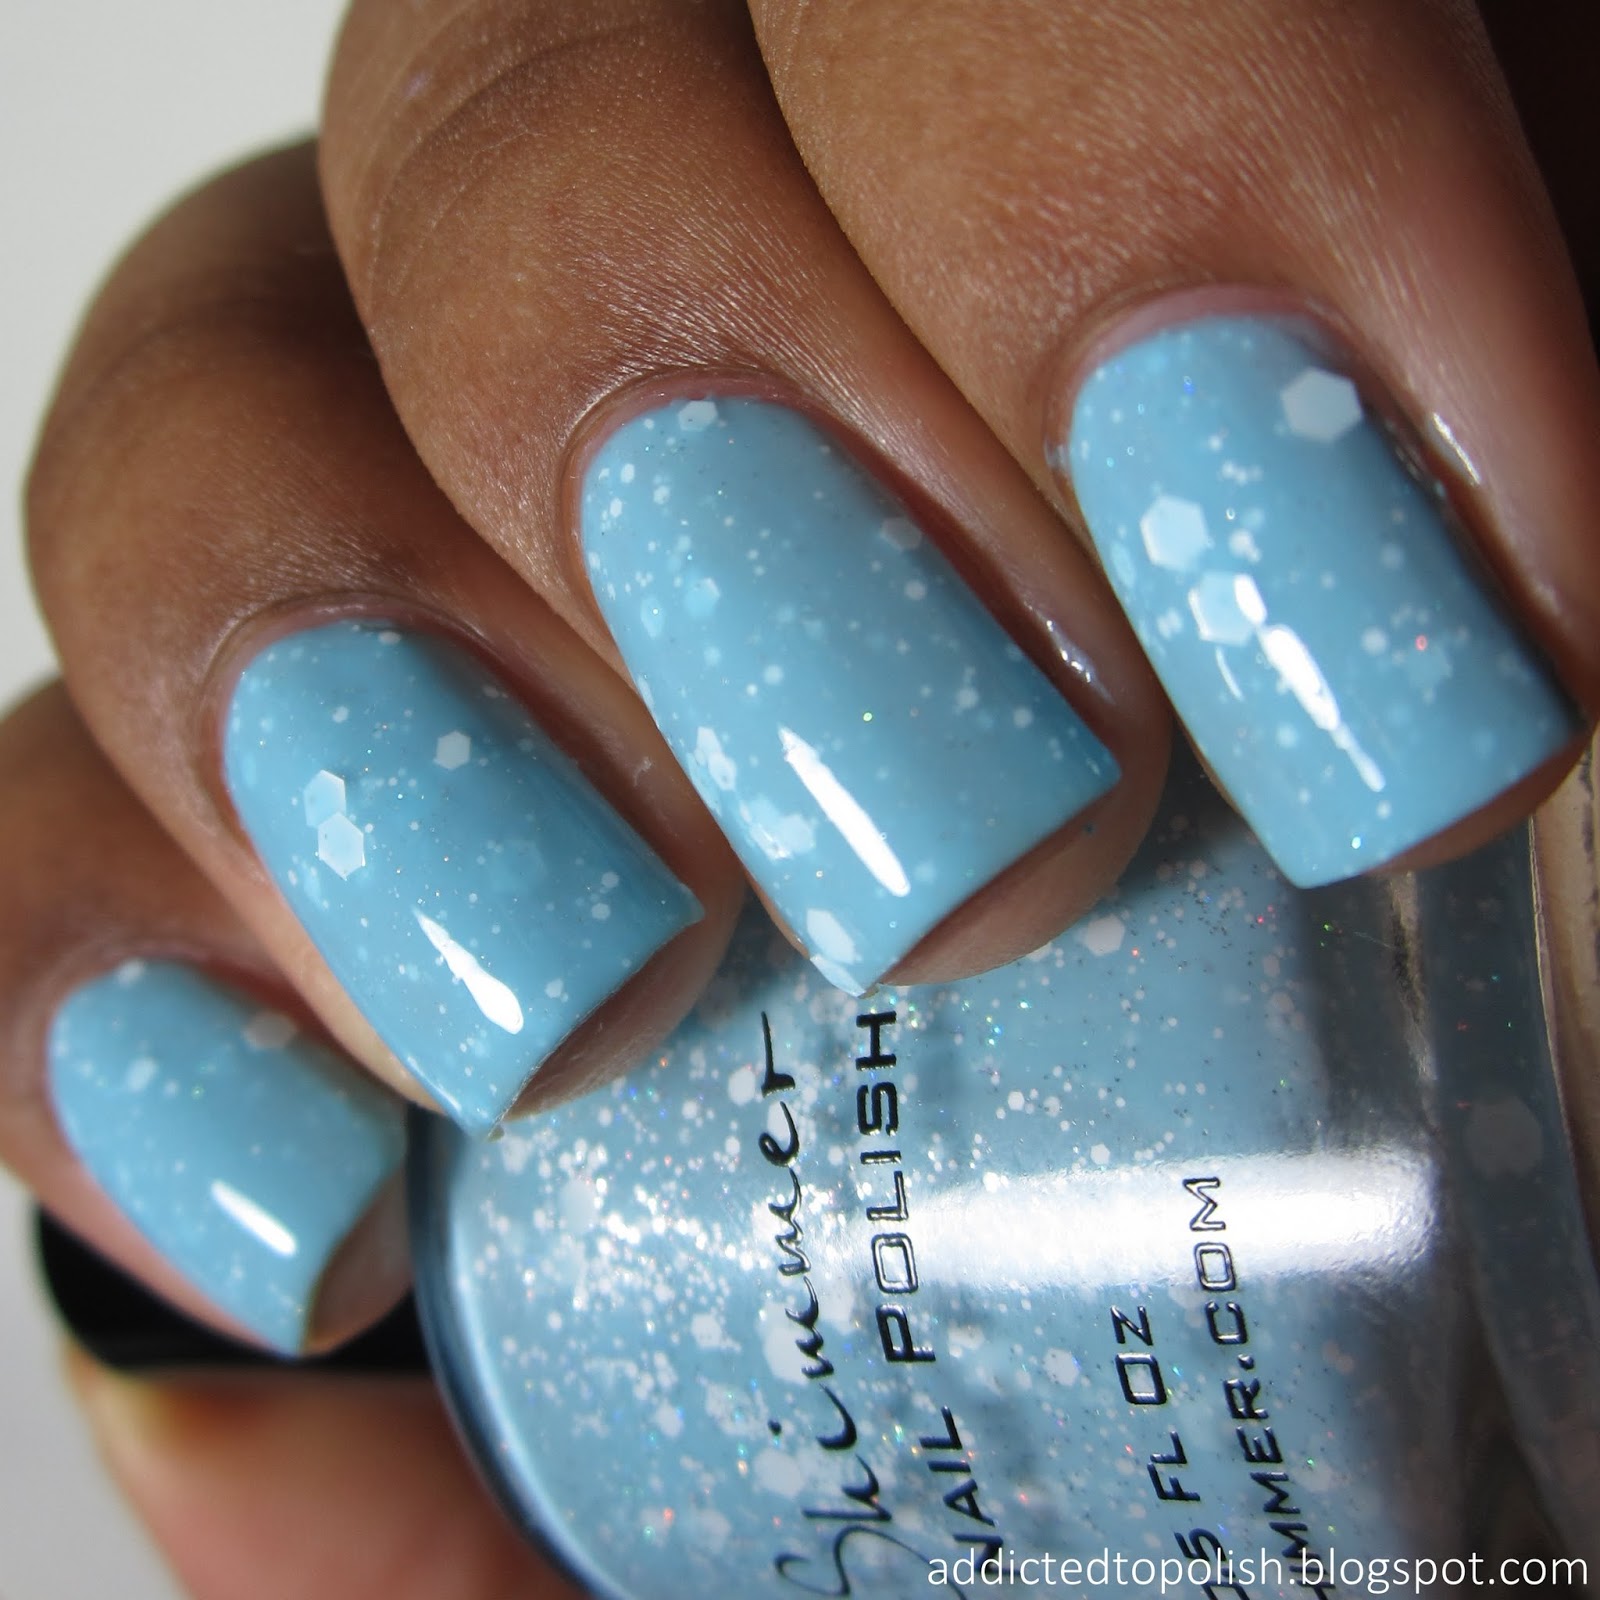 Addicted to Polish: KBShimmer Winter 2014 Collection Selections